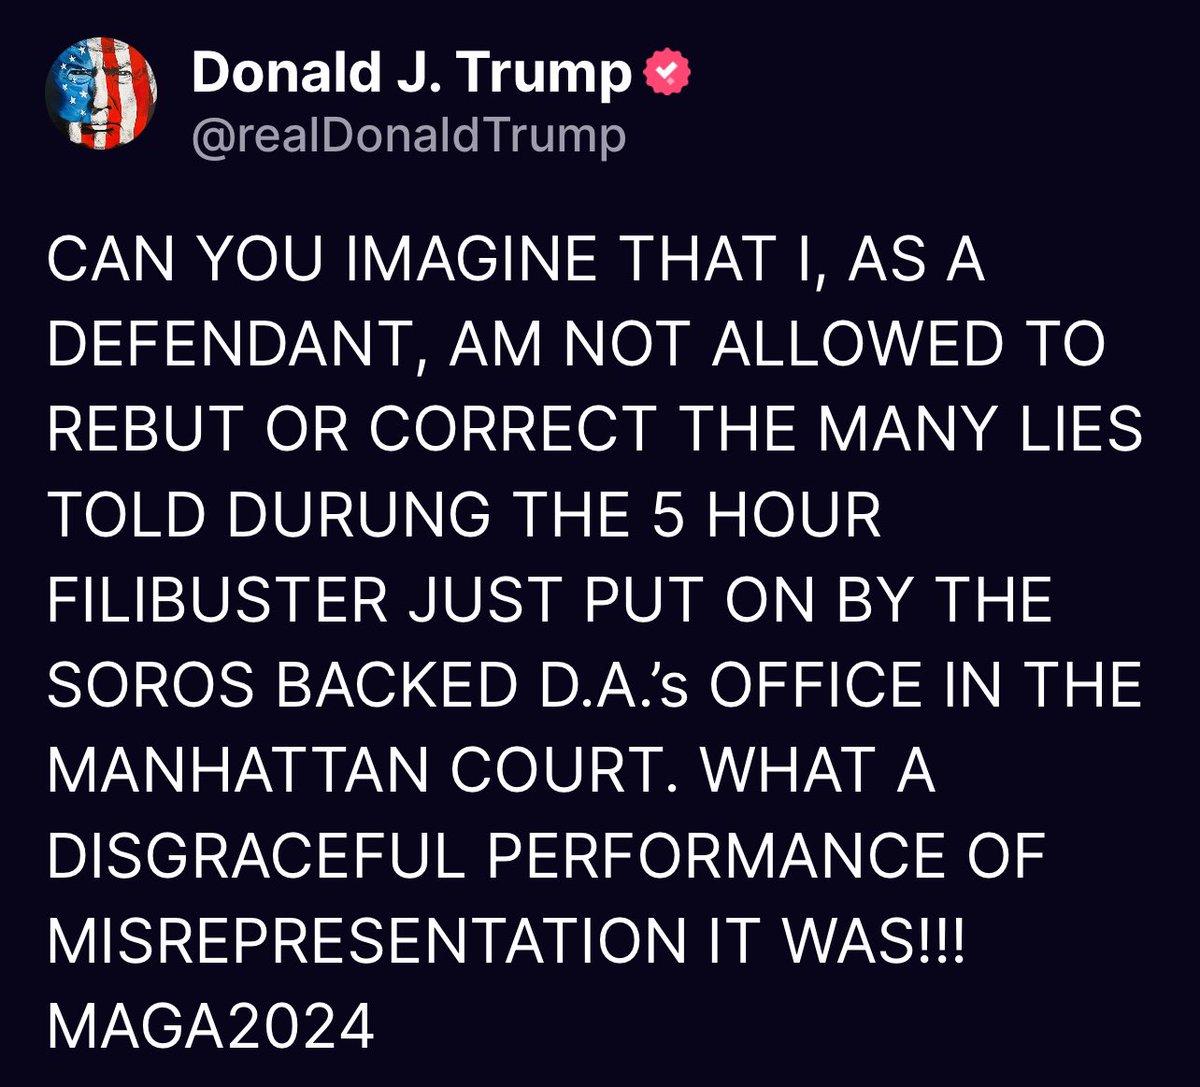 CAN YOU IMAGINE THAT I, AS A DEFENDANT, AM NOT ALLOWED TO REBUT OR CORRECT THE MANY LIES TOLD DURUNG THE 5 HOUR FILIBUSTER JUST PUT ON BY THE SOROS BACKED D.A.’s OFFICE IN THE MANHATTAN COURT. WHAT A DISGRACEFUL PERFORMANCE OF MISREPRESENTATION IT WAS!!! MAGA2024 Donald Trump